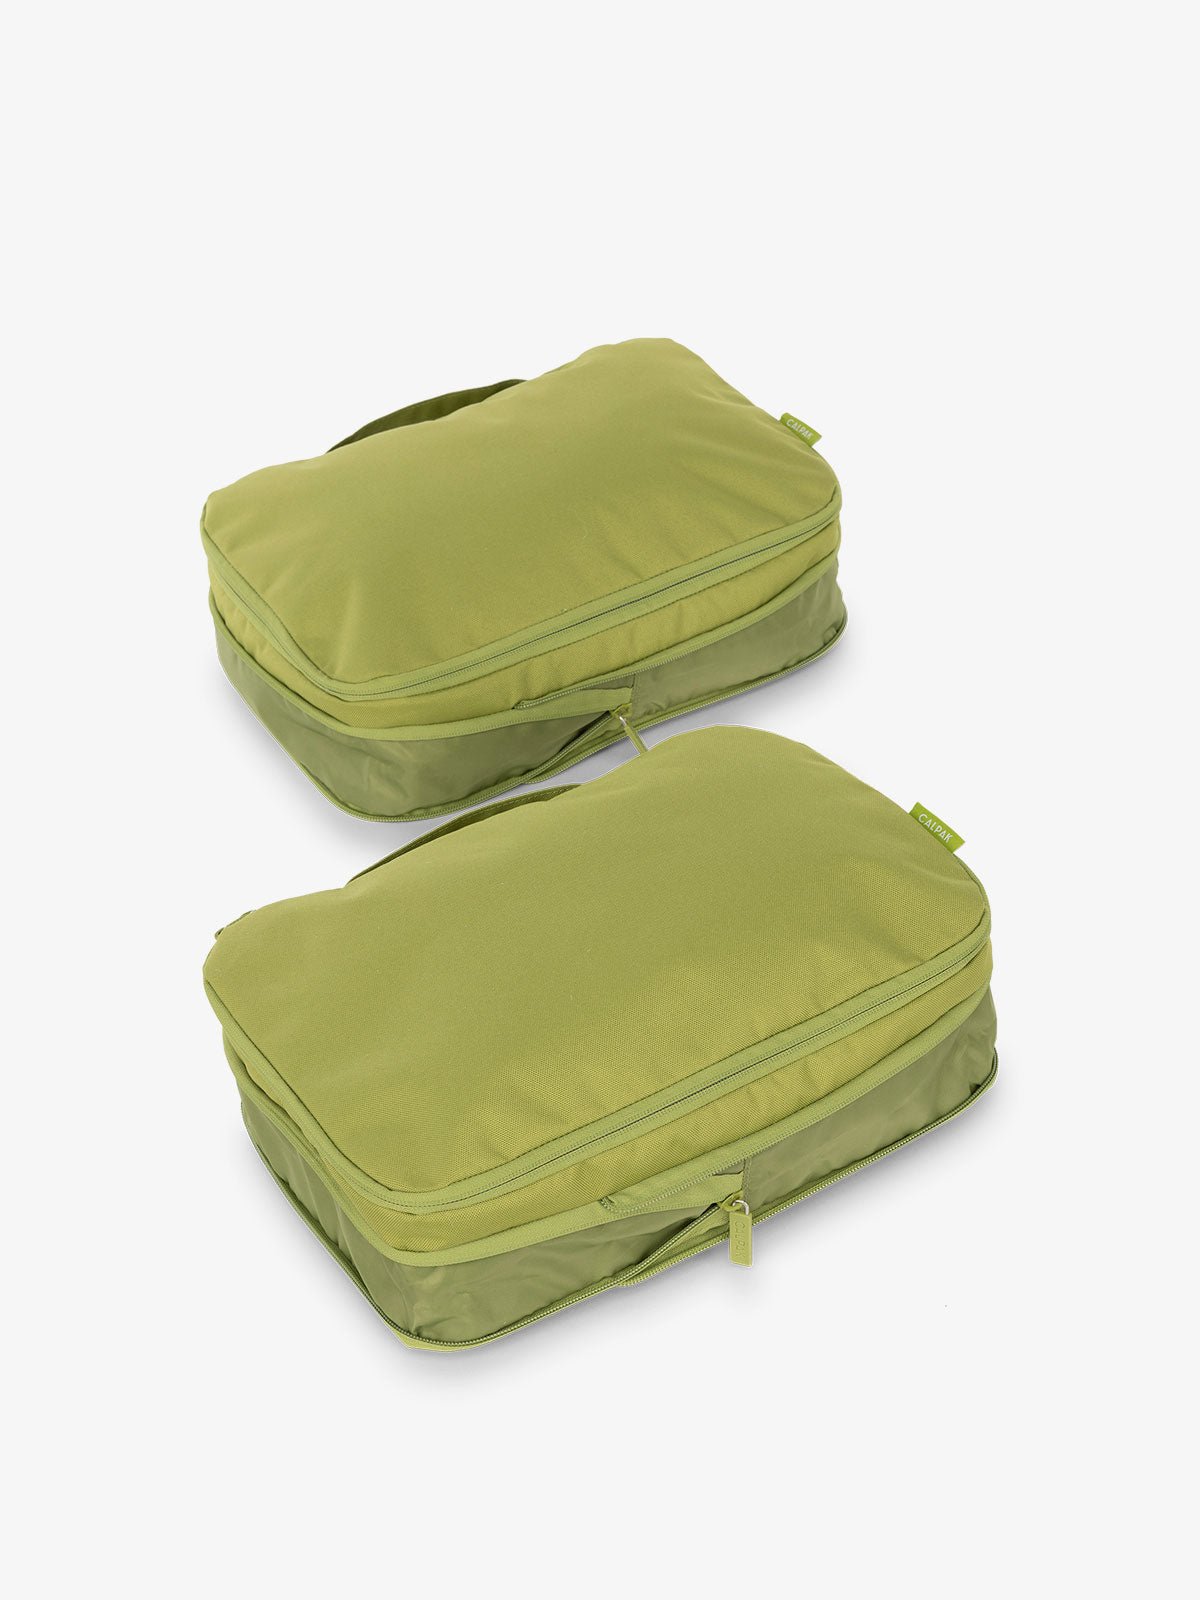 CALPAK compression packing cubes with handles in light green